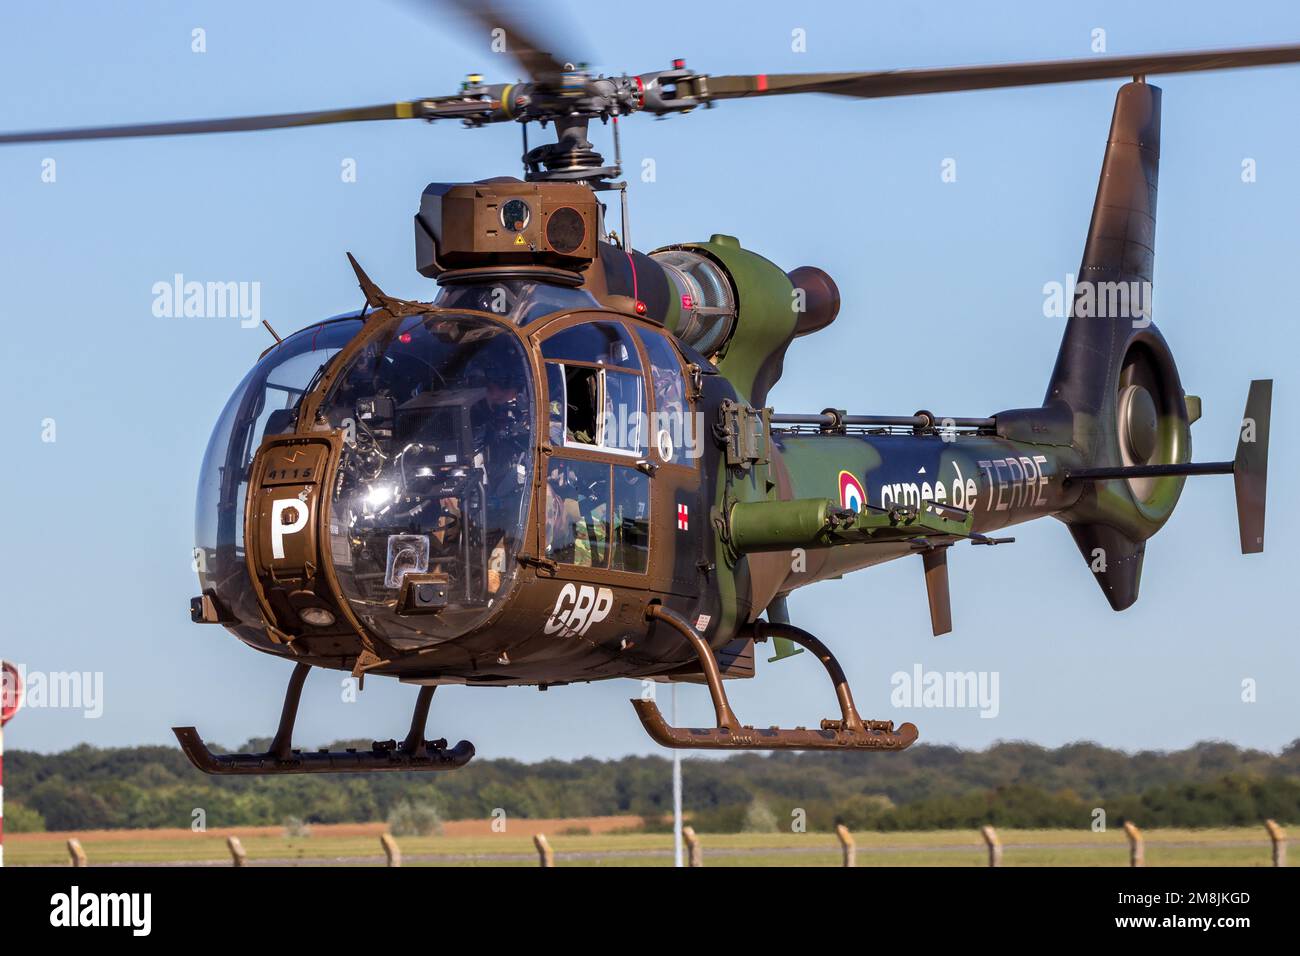 French Army Aerospatiale SA342M Gazelle helicopter taking off. France - August 24, 2016 Stock Photo